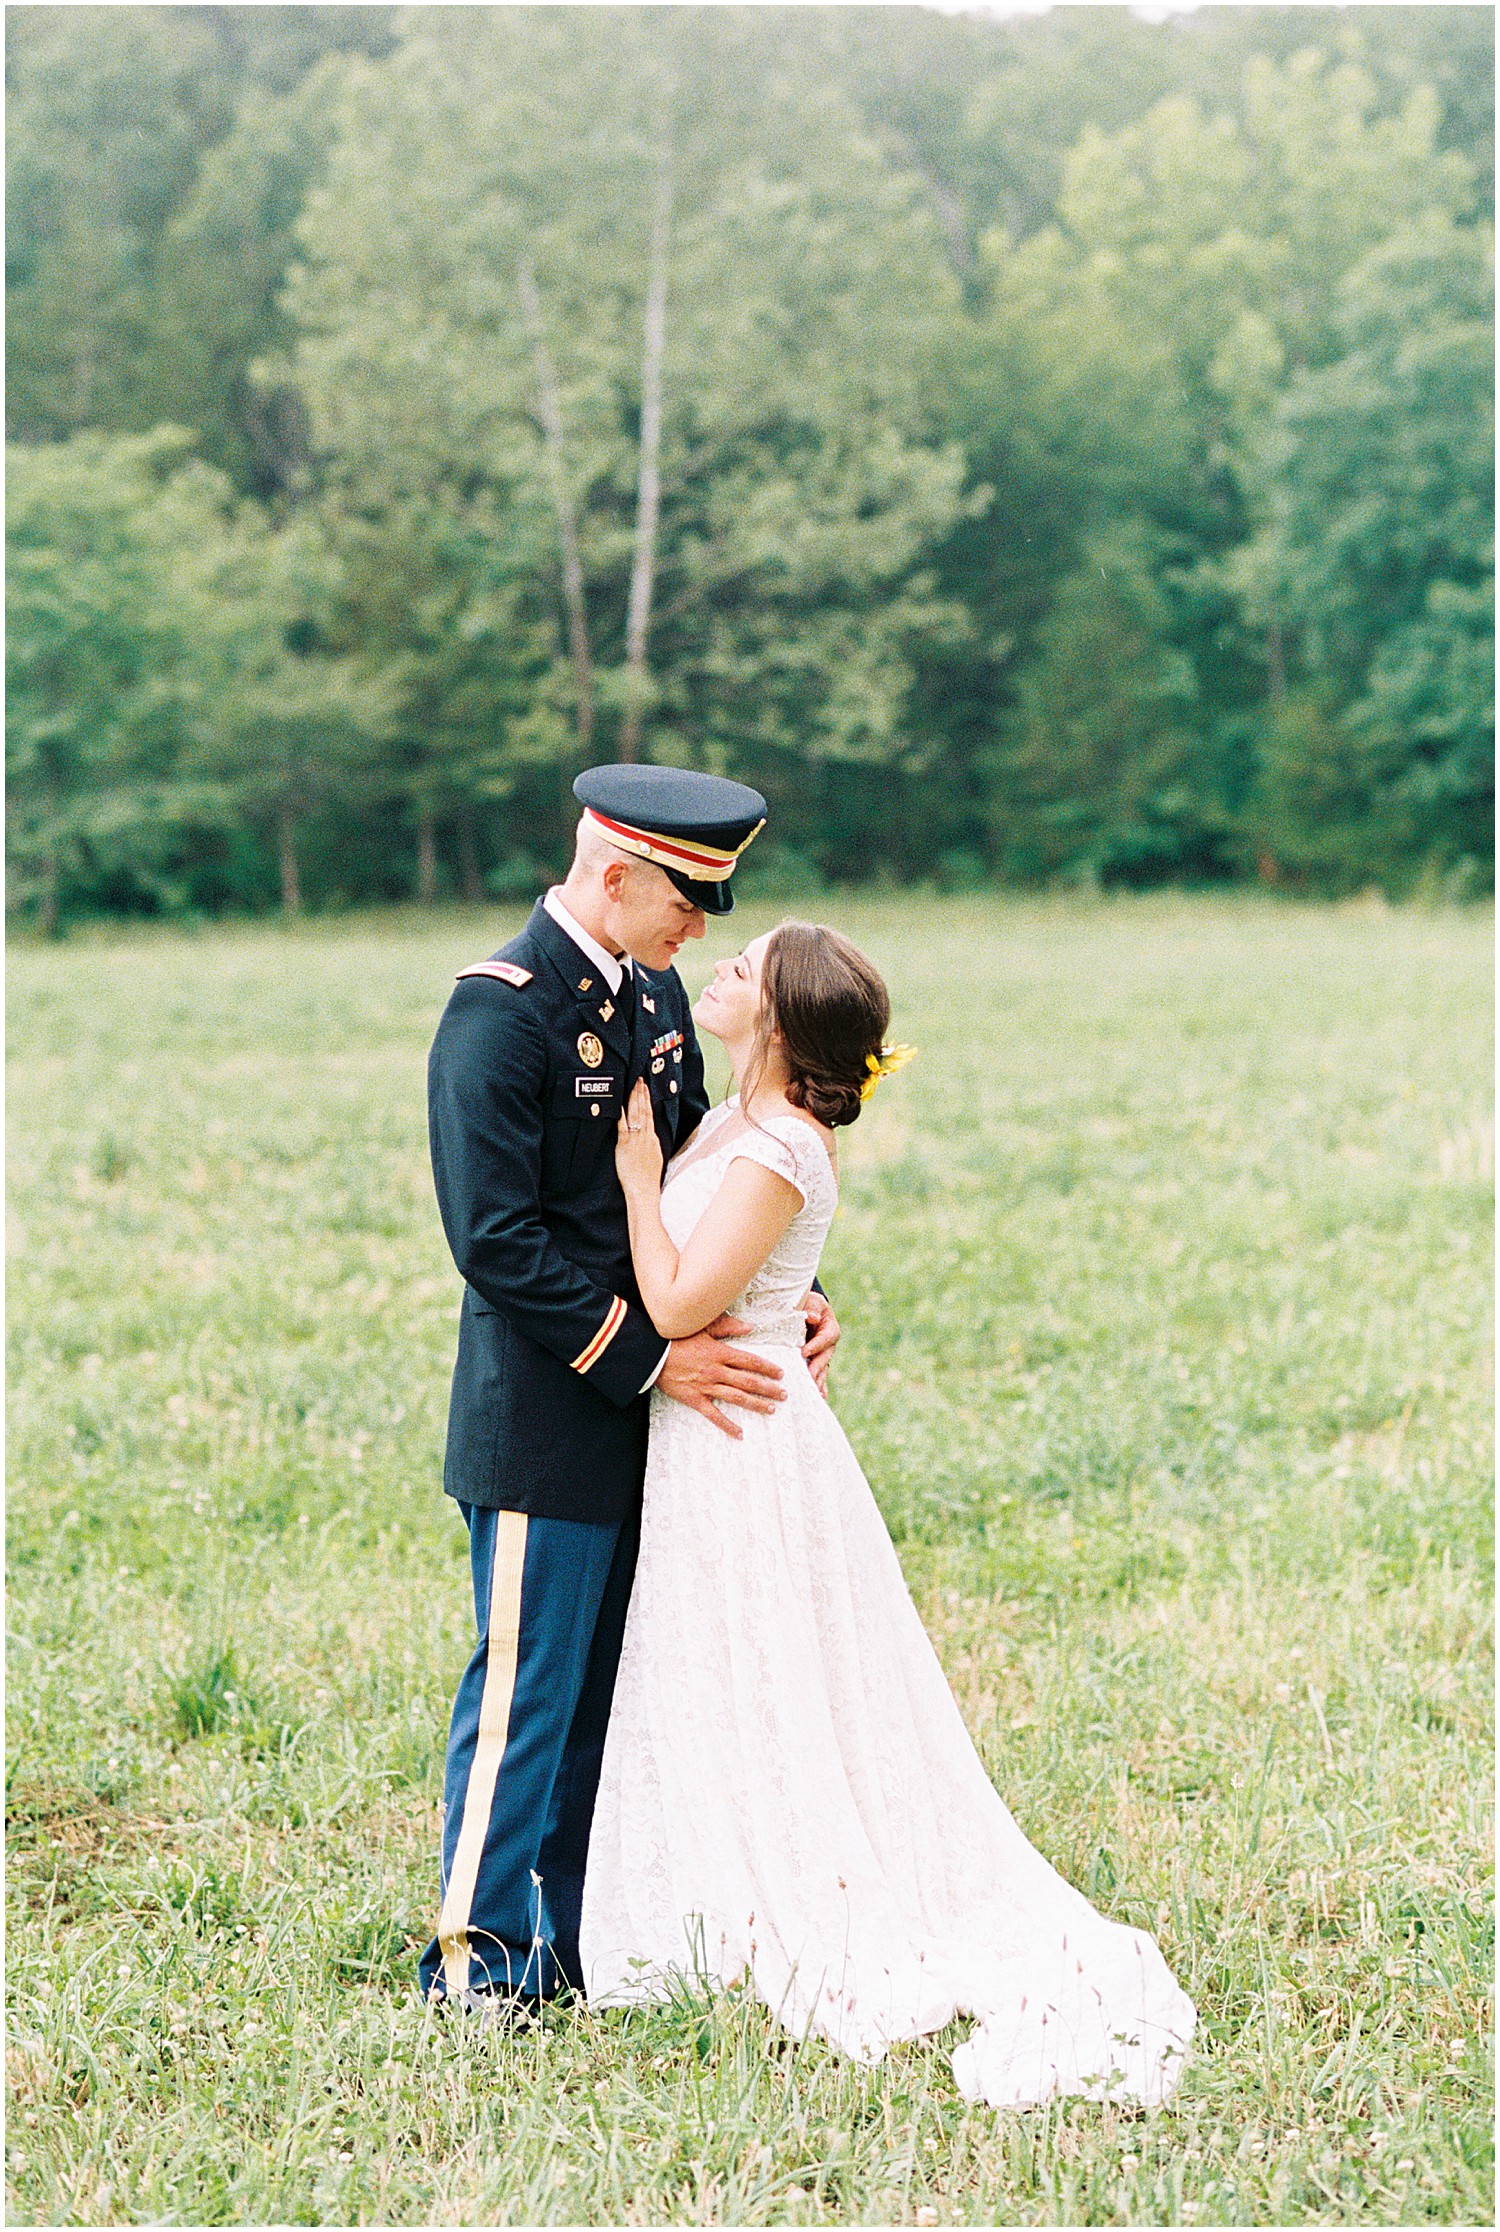 film image of bride and groom smiling at each other in grassy field on wedding day